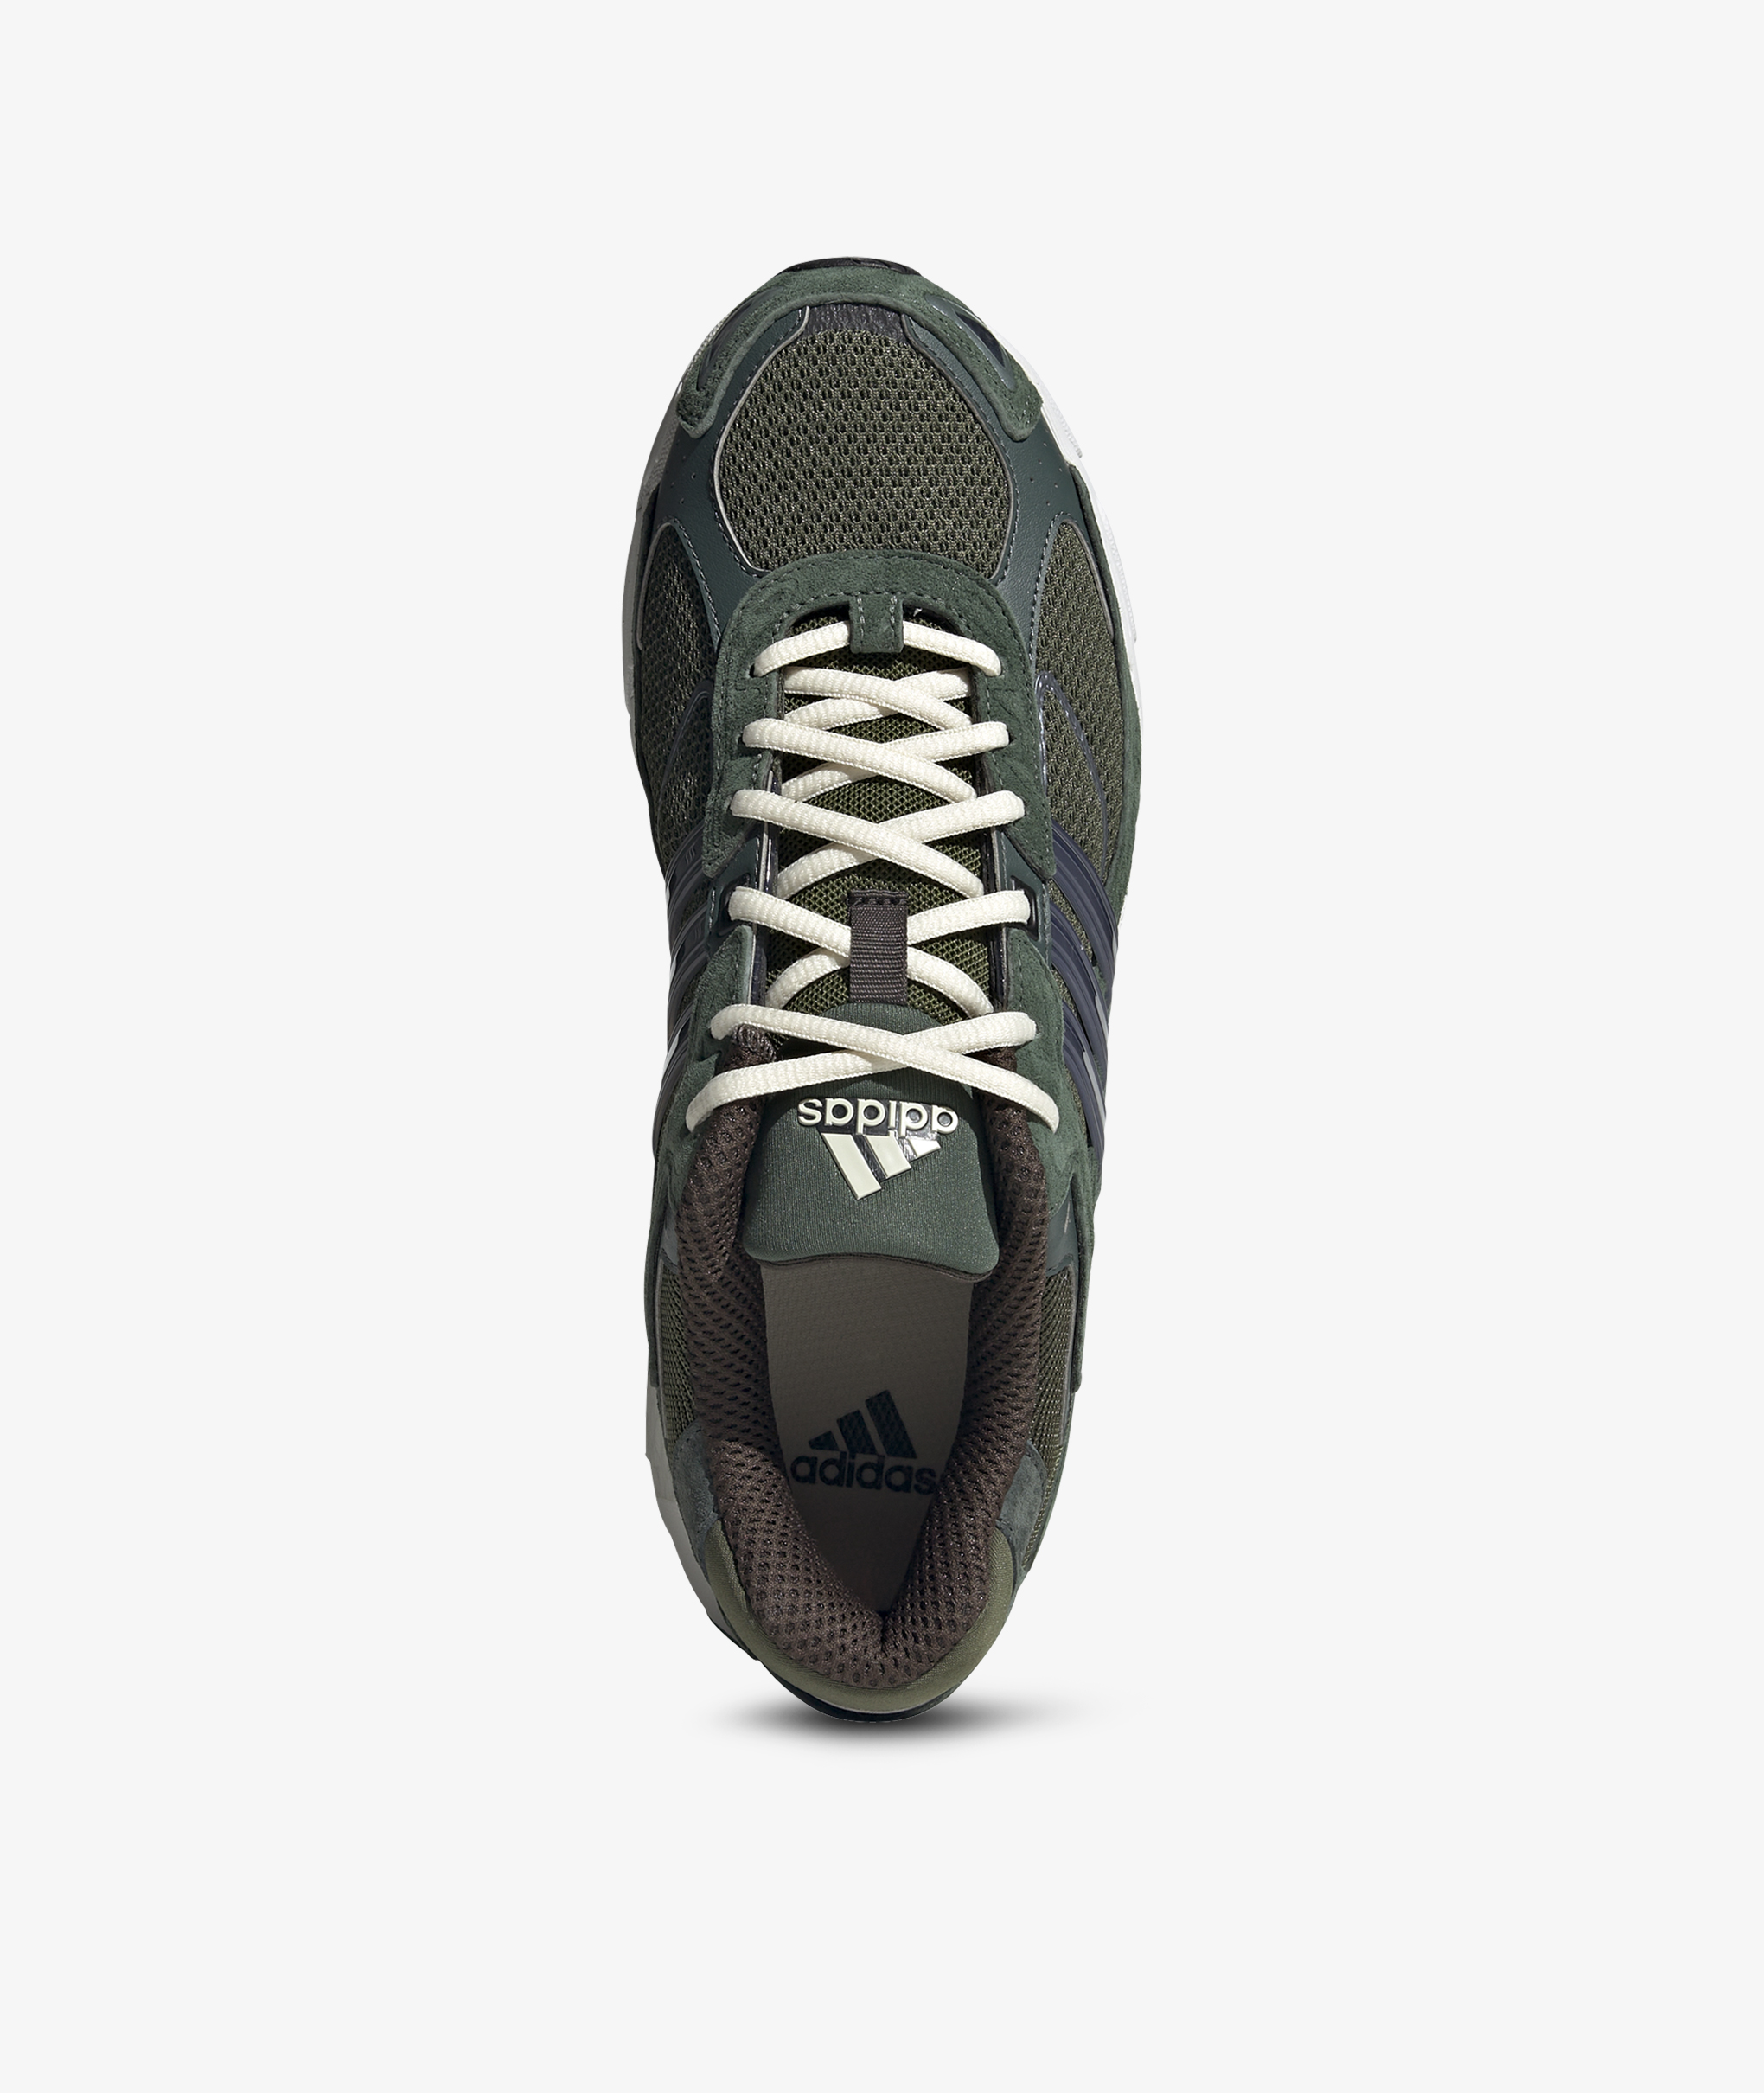 Norse Store | Shipping Worldwide - adidas Originals Response CL ...